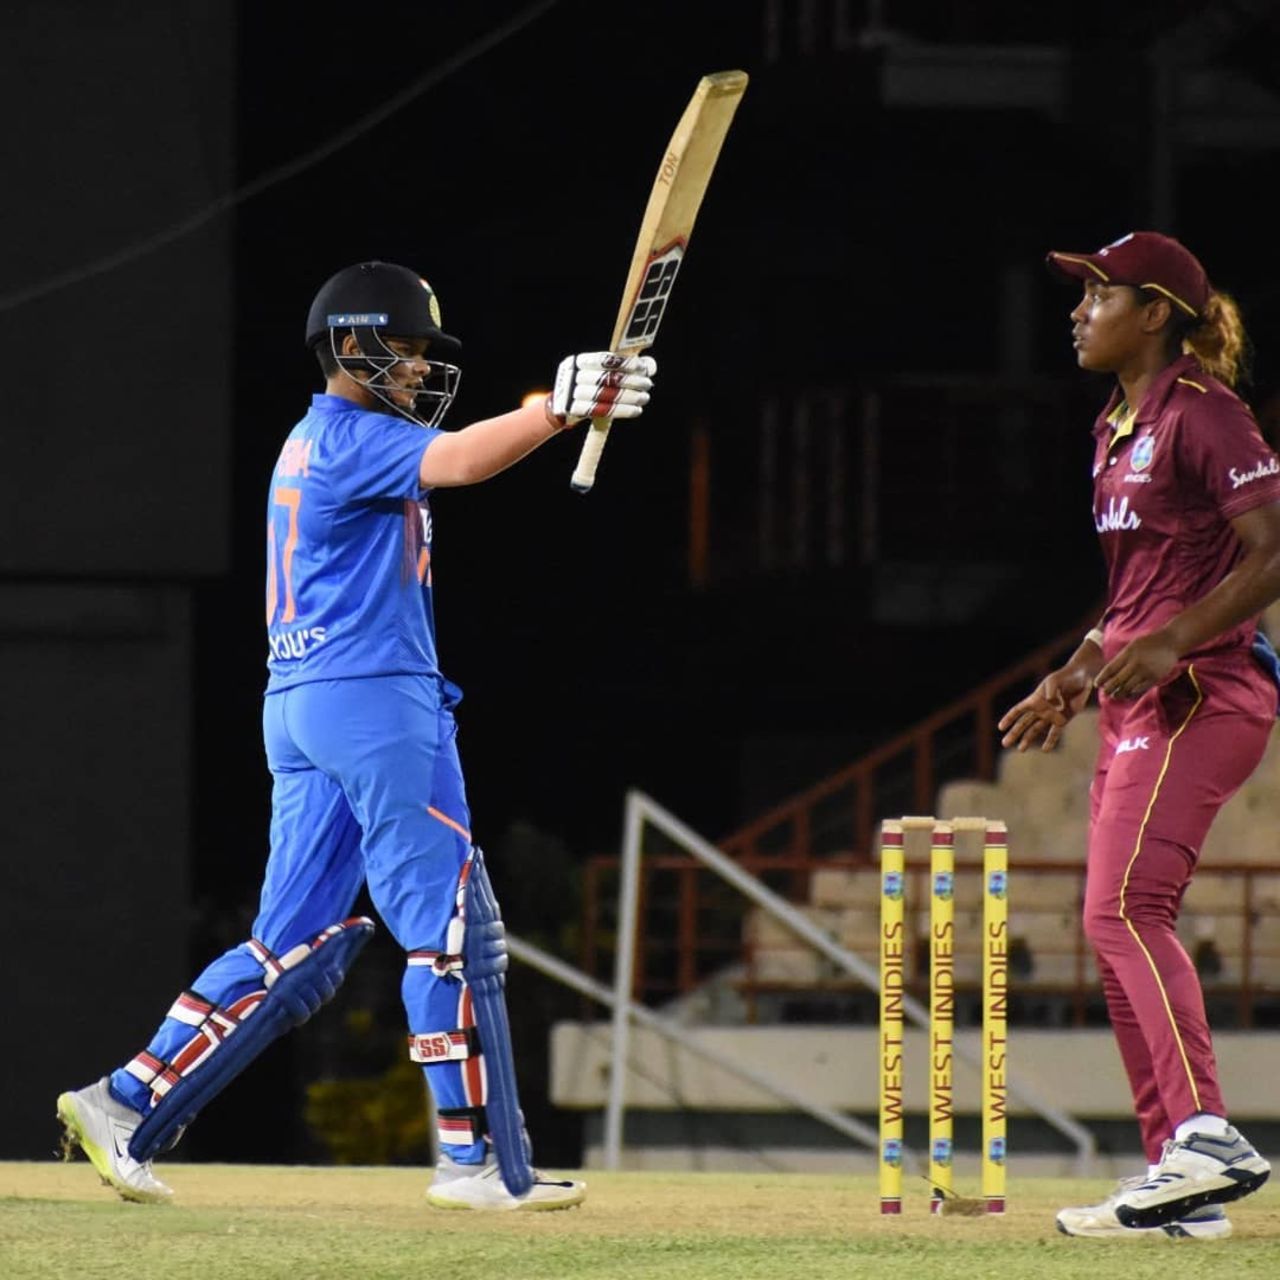 The buzz around 15-year old Shafali Verma keeps growing, West Indies v India, 1st Women's T20I, Gros Islet, November 9, 2019